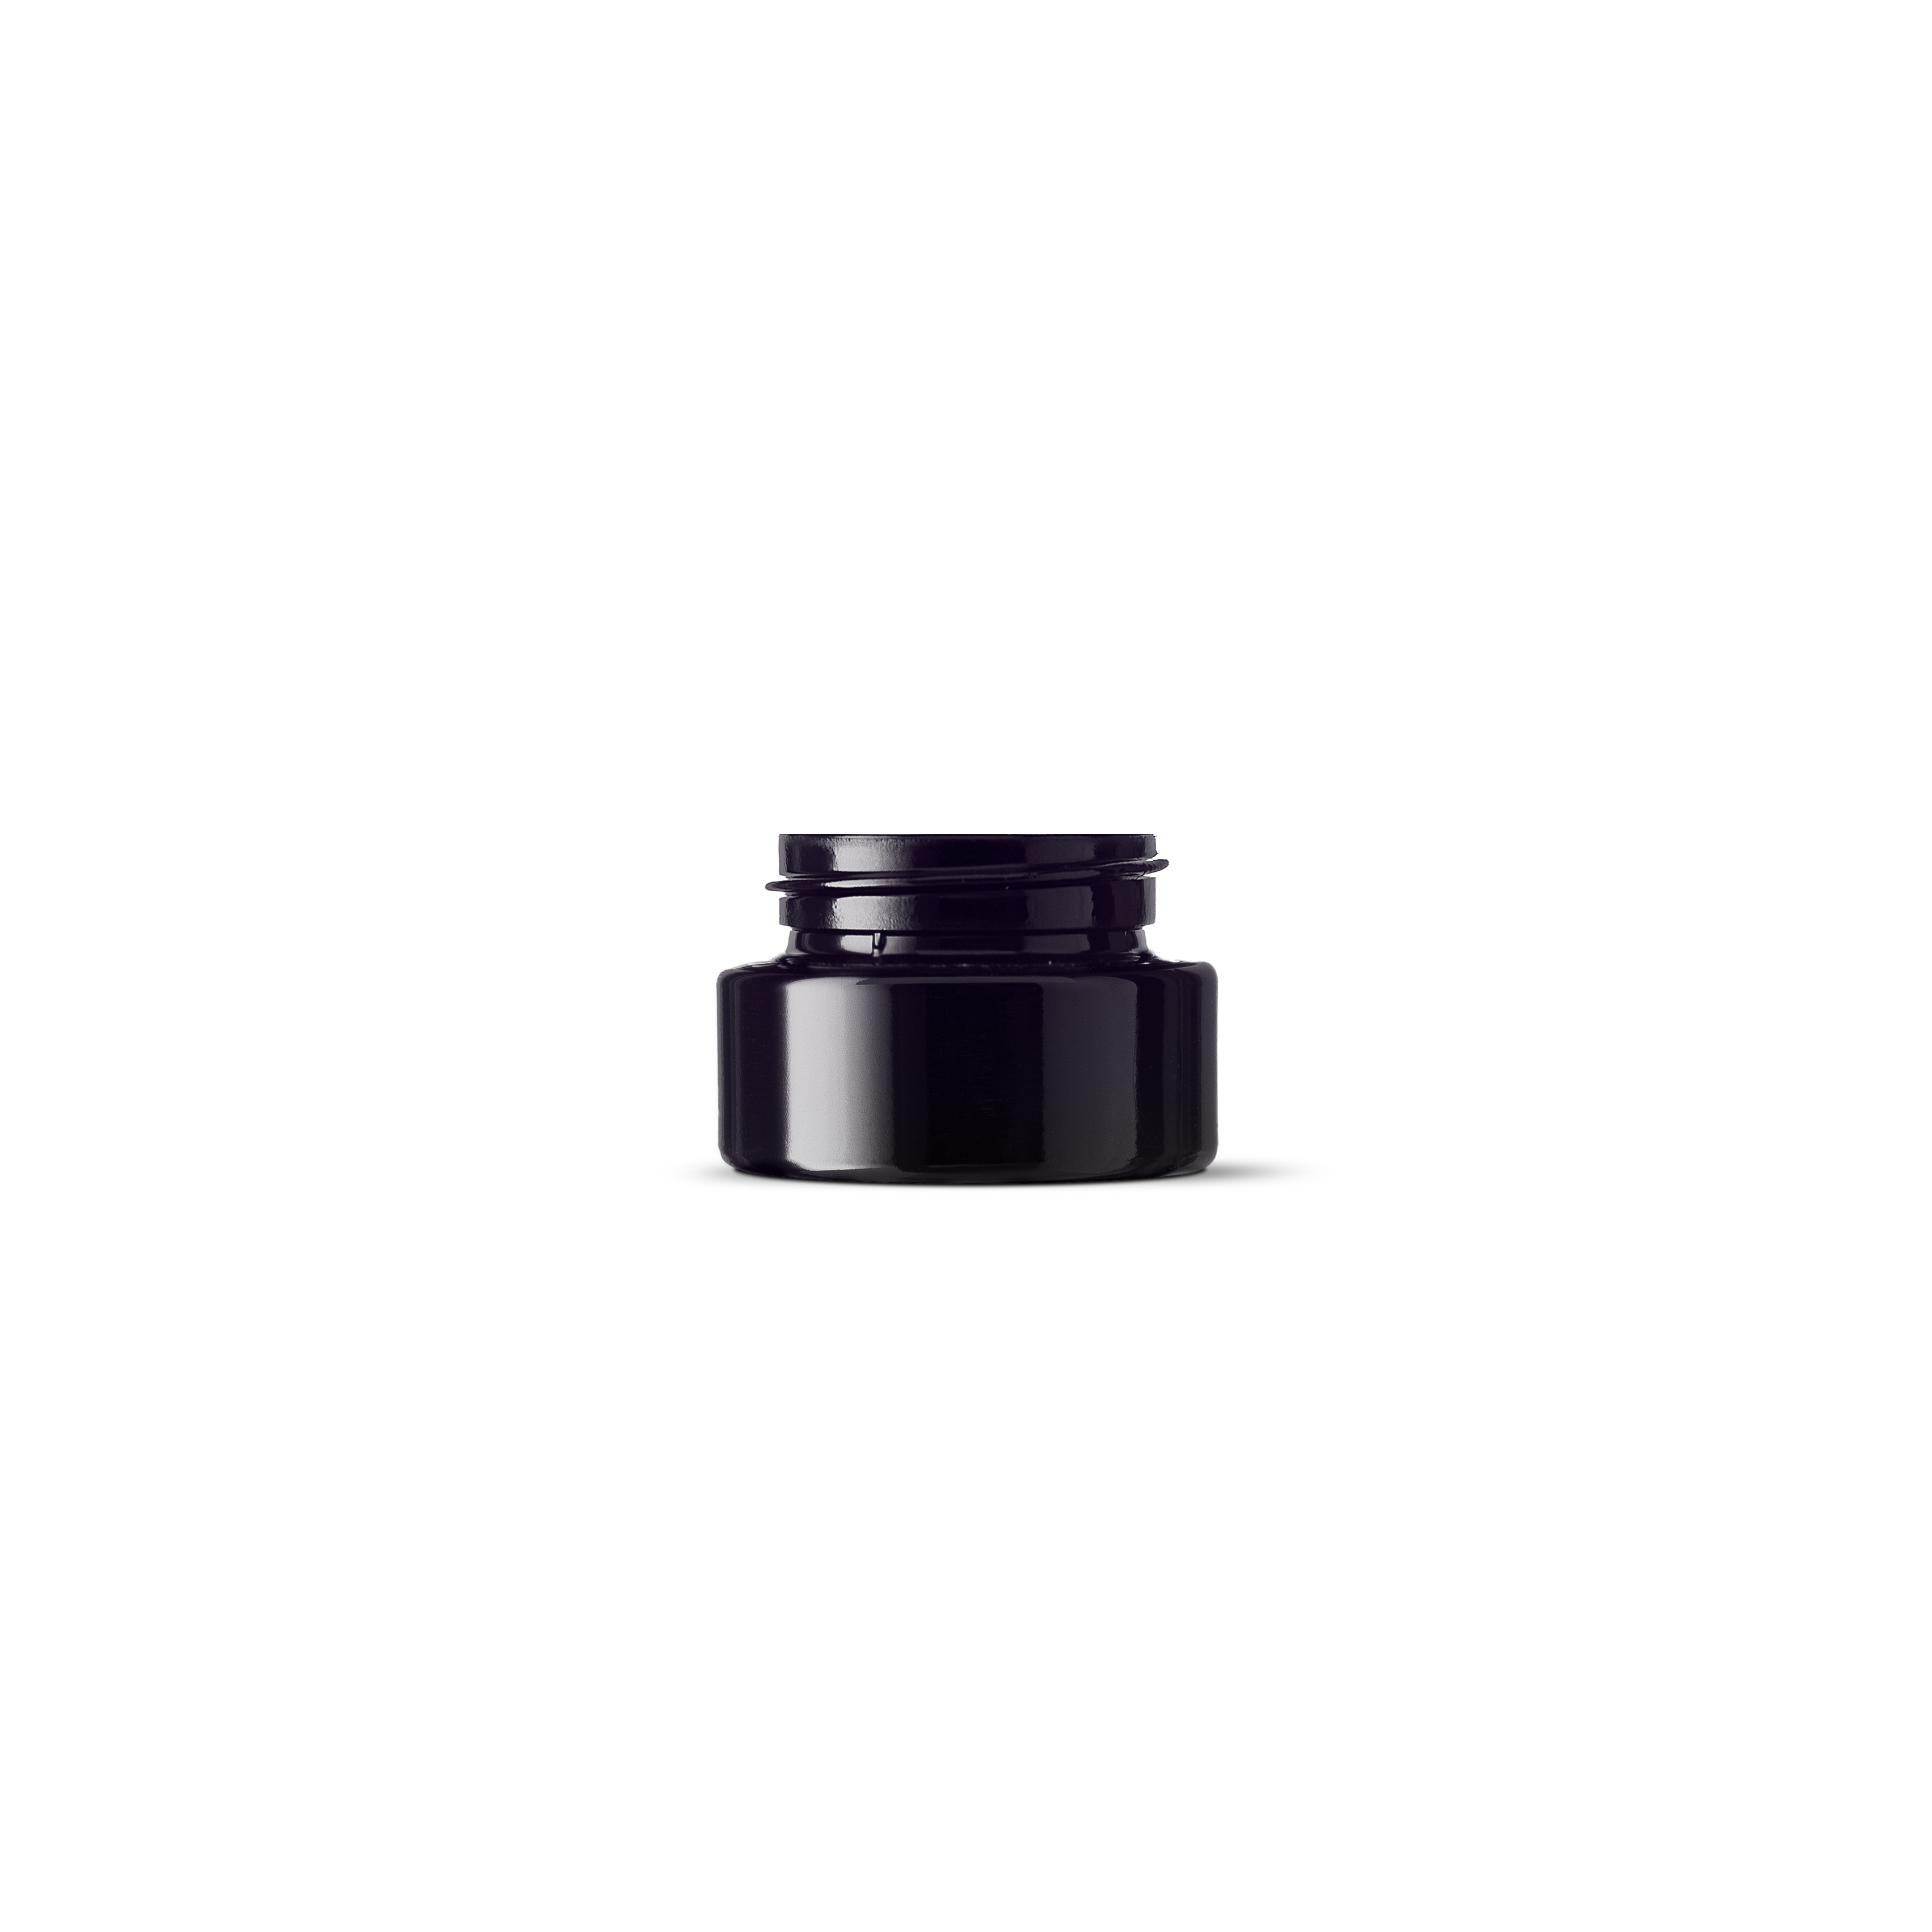 Cosmetic jar Eris 15 ml, 35 special thread, fit for child-resistant lid, Miron